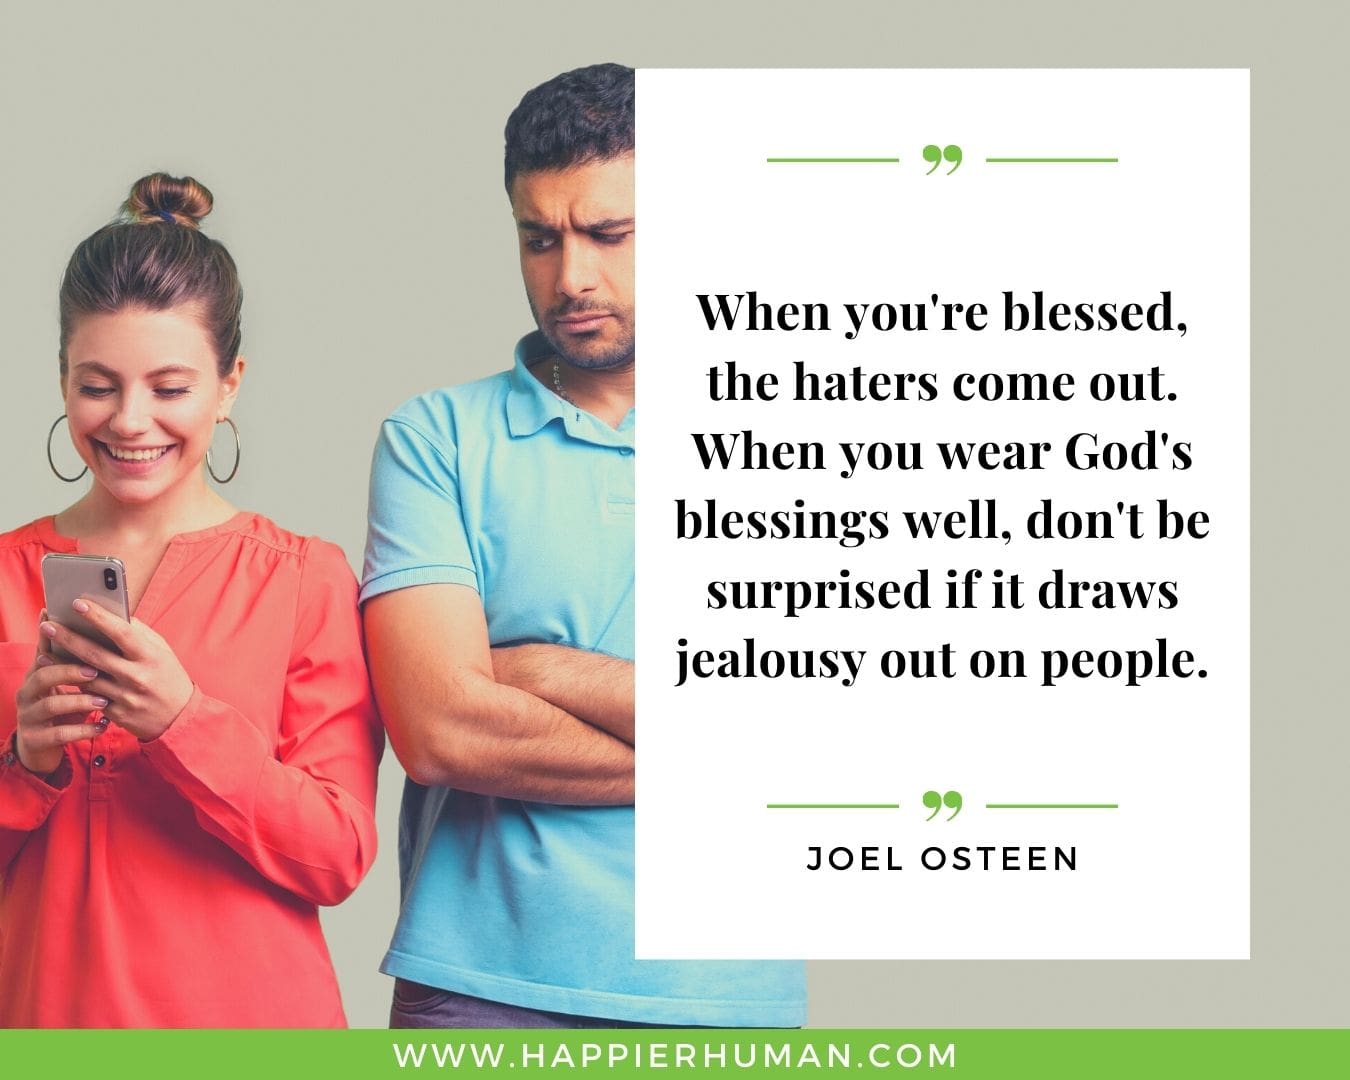 Haters Quotes - “When you're blessed, the haters come out. When you wear God's blessings well, don't be surprised if it draws jealousy out on people.” - Joel Osteen